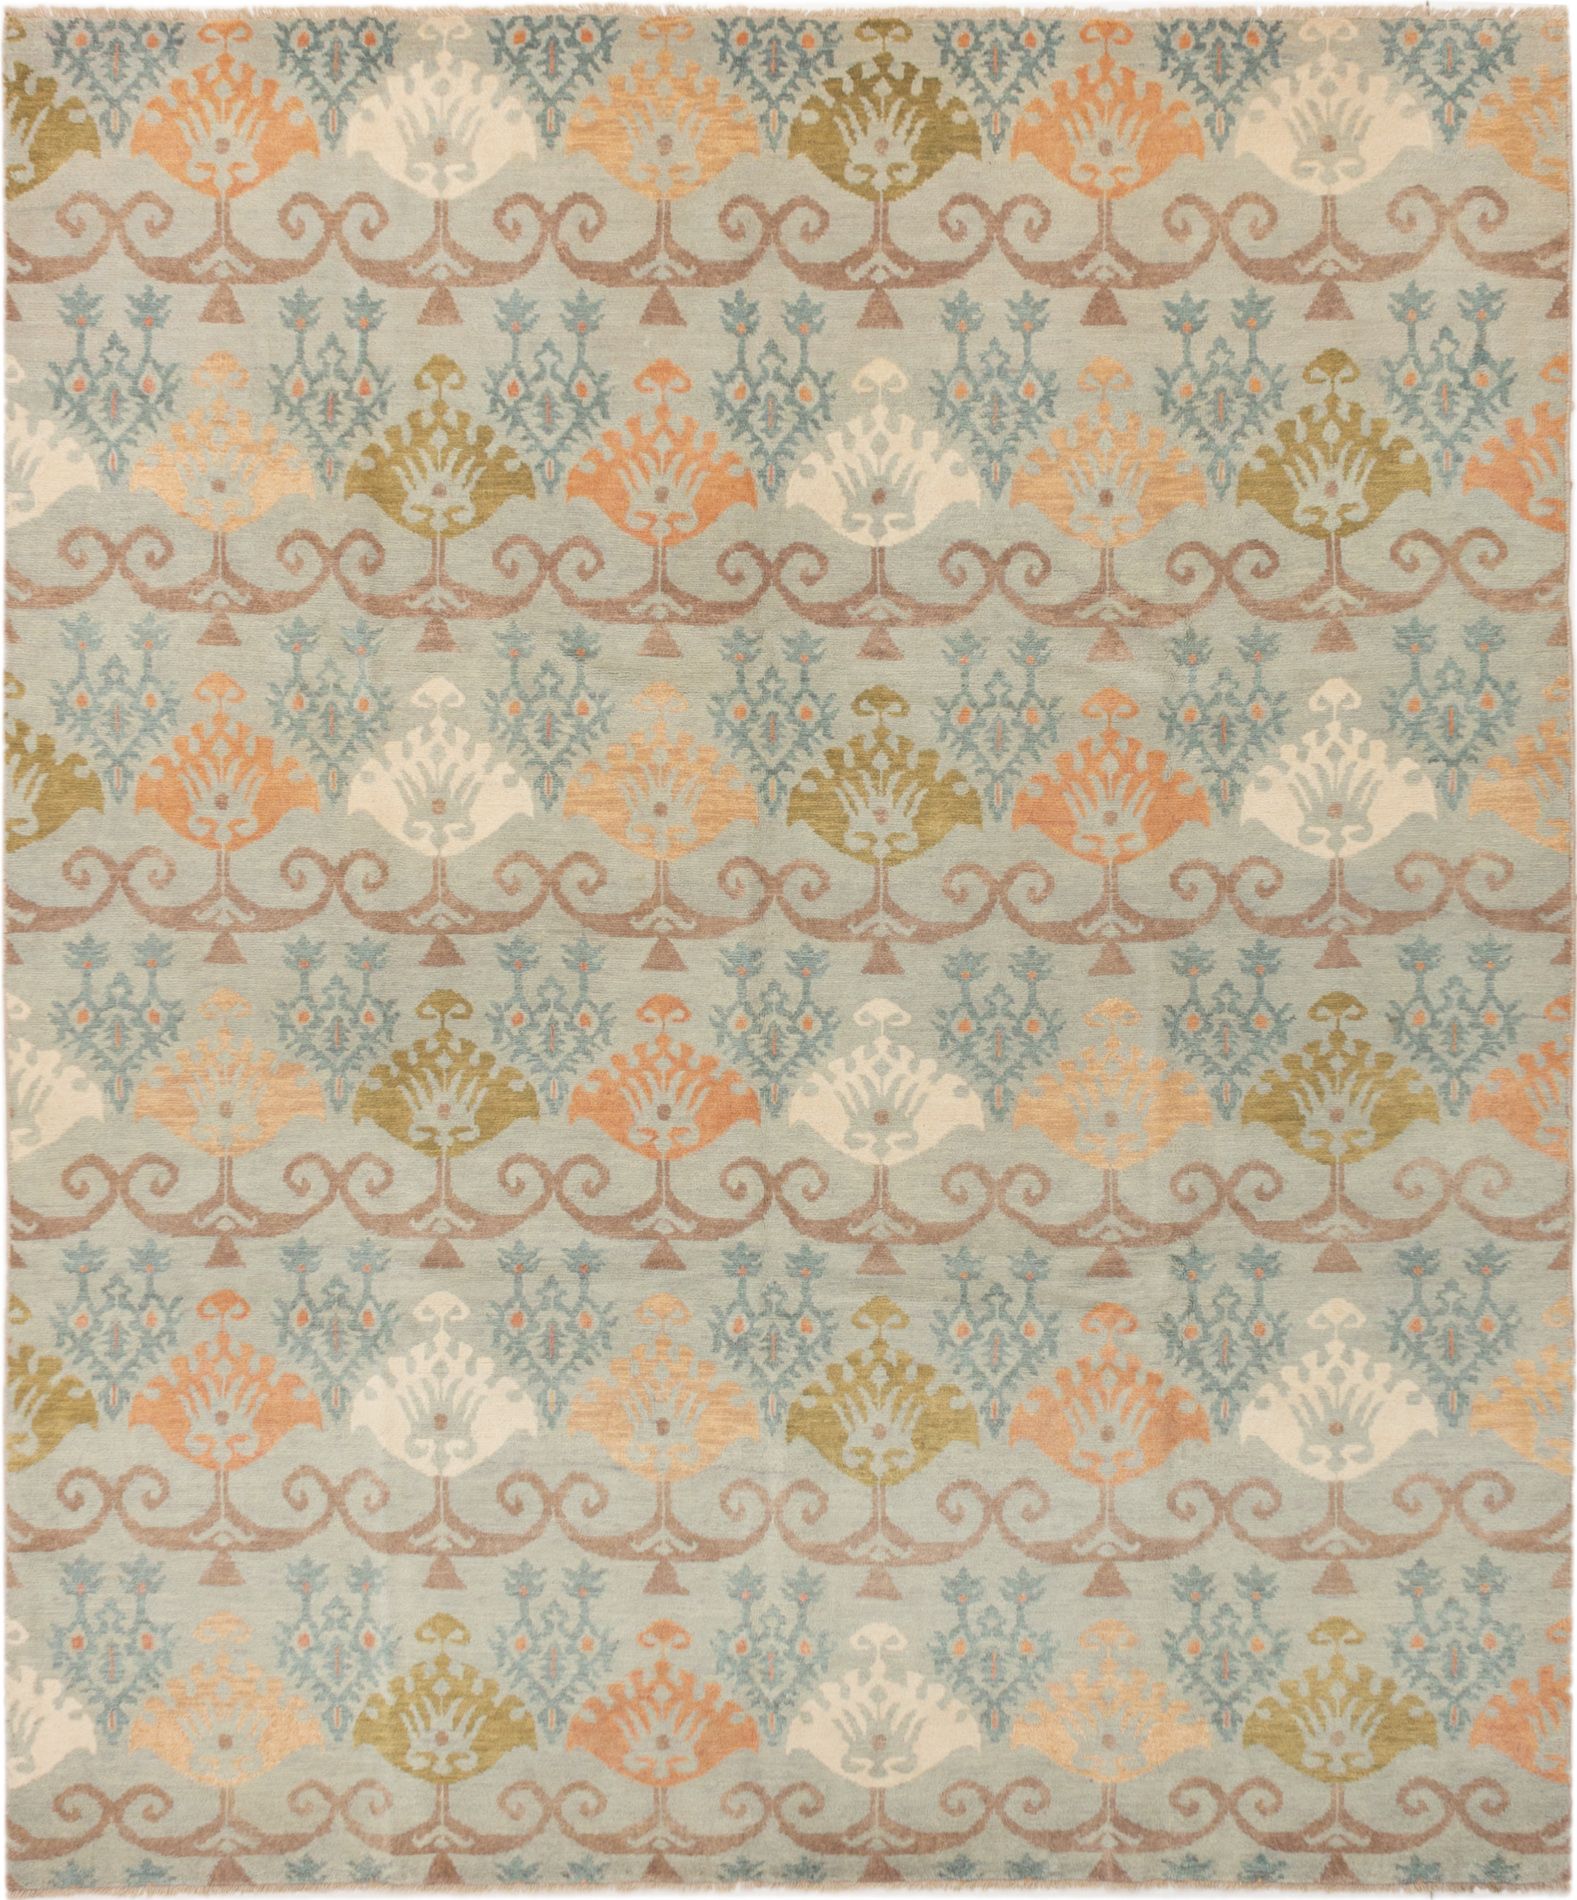 Hand-knotted Ikat Royale Light Grey Wool Rug 8'3" x 9'10" Size: 8'3" x 9'10"  